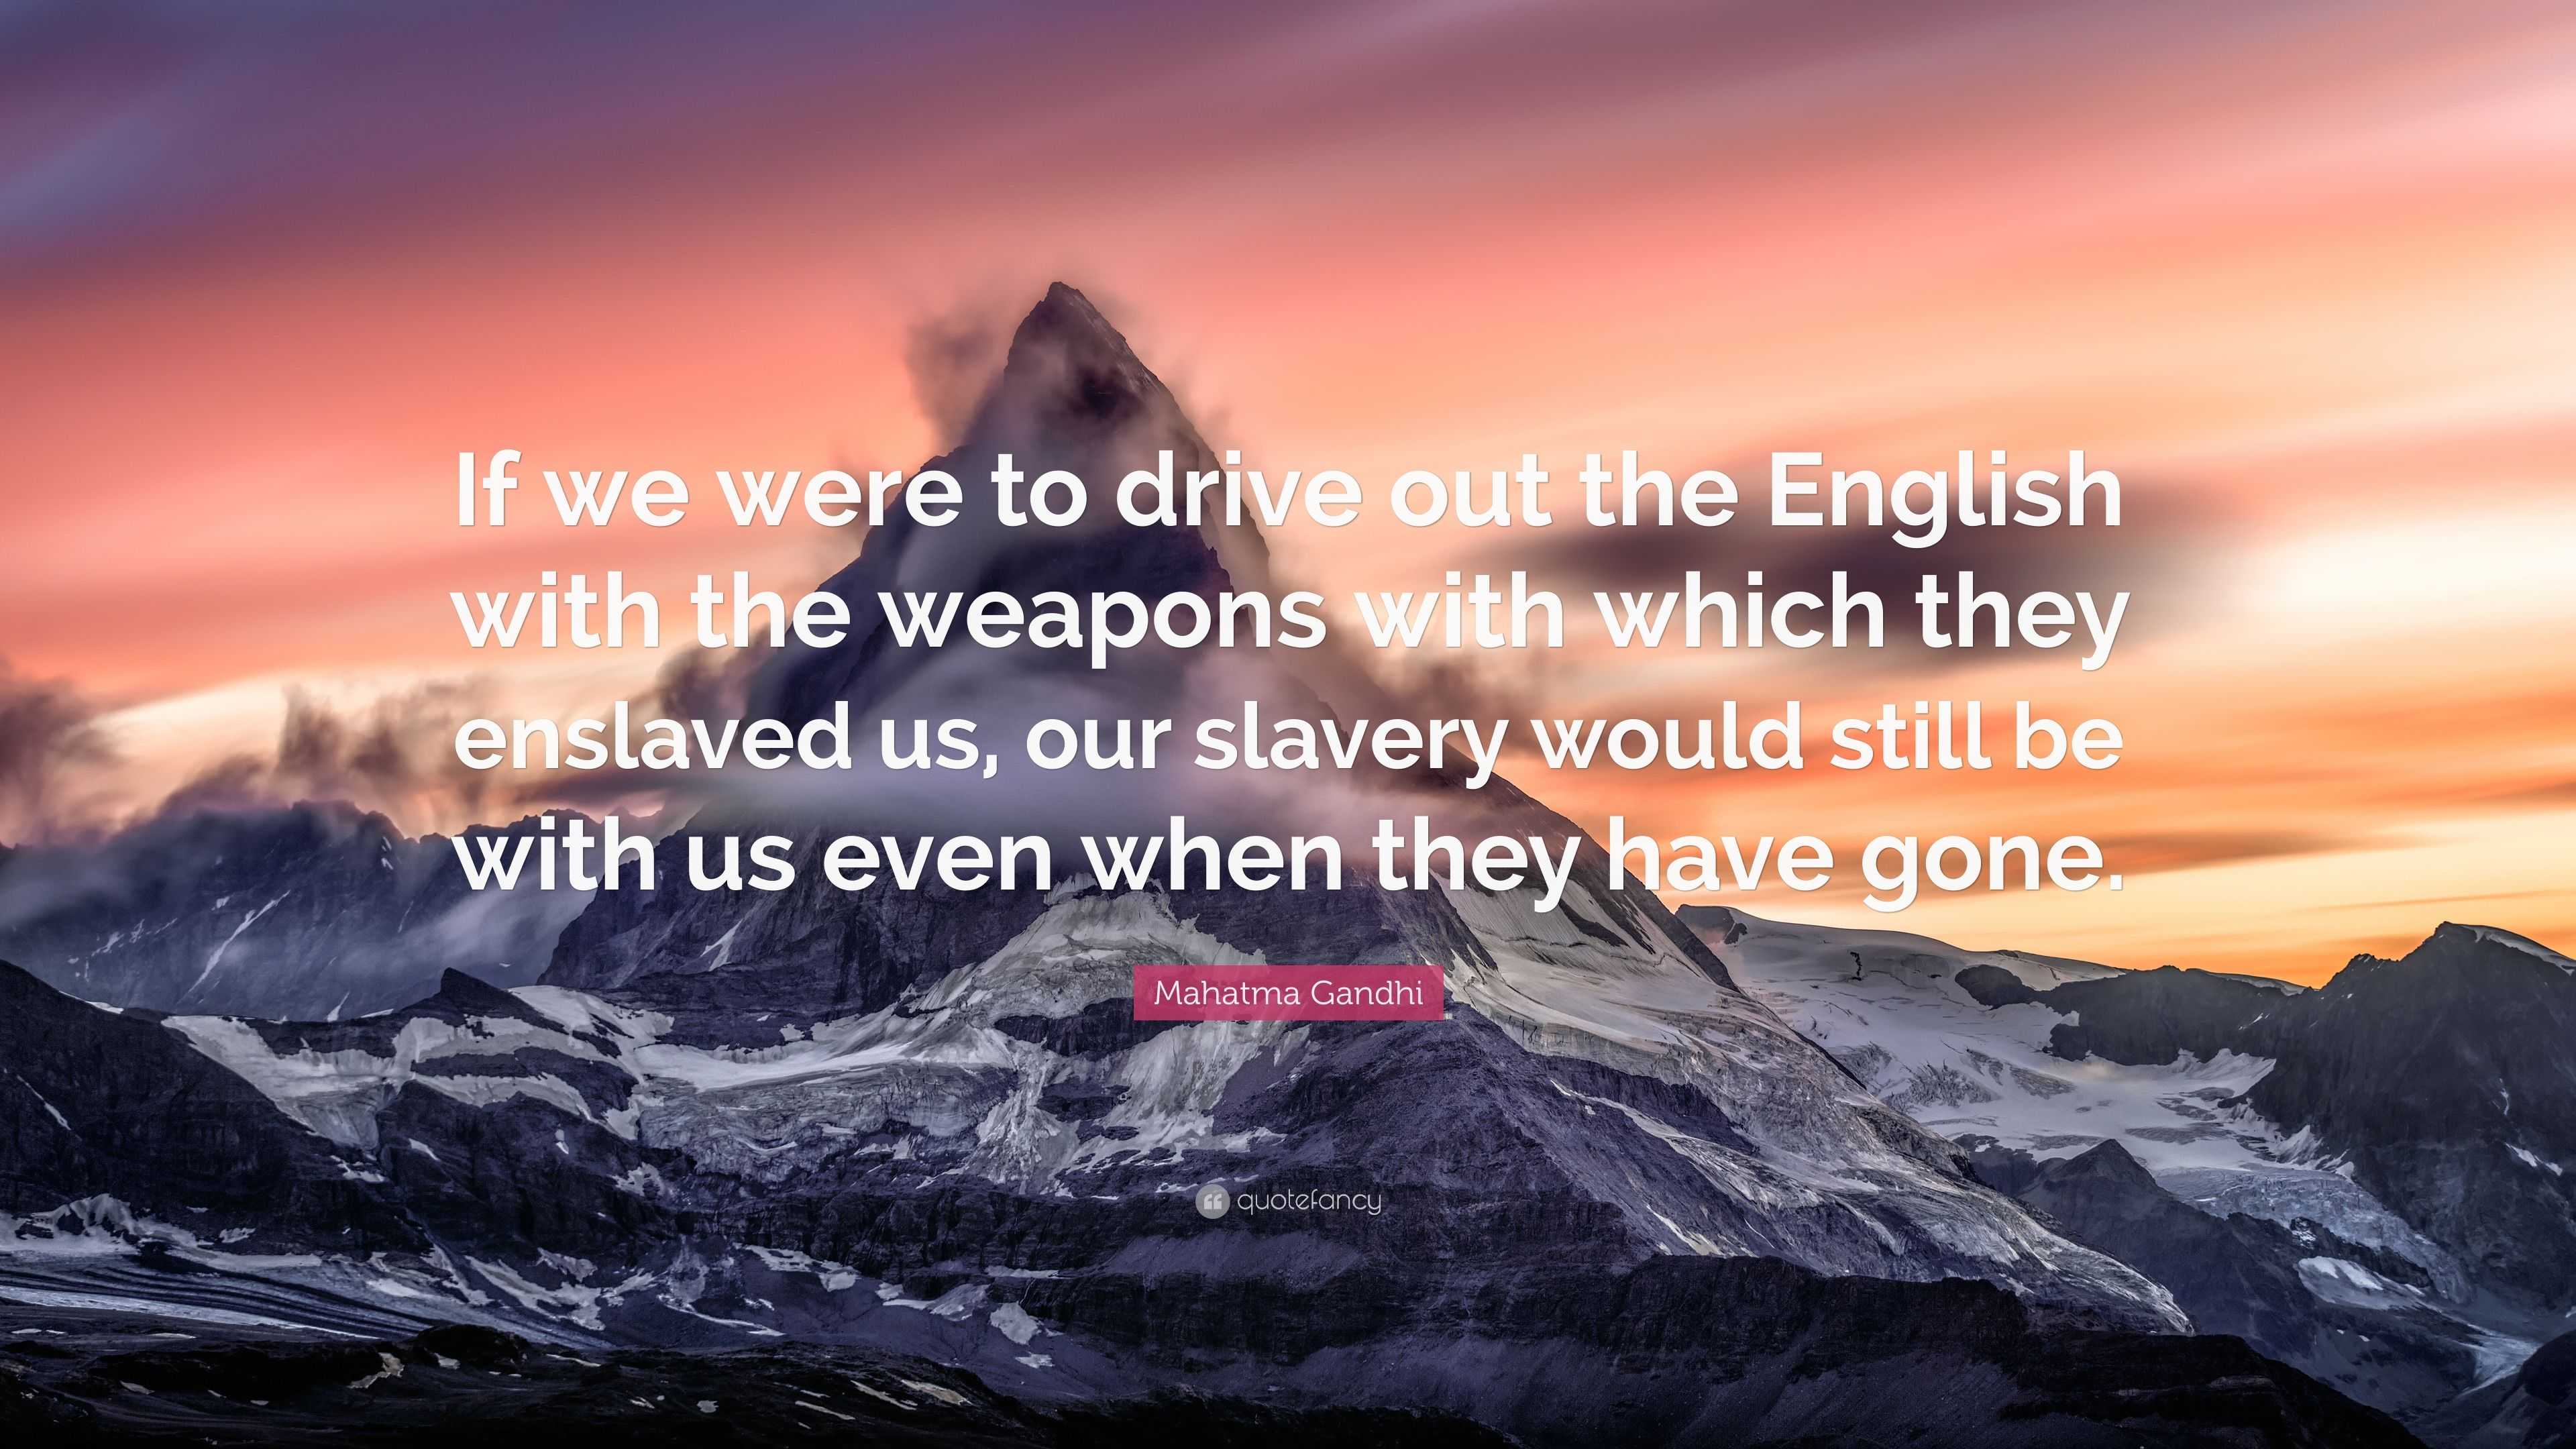 Mahatma Gandhi Quote: “If we were to drive out the English with the ...